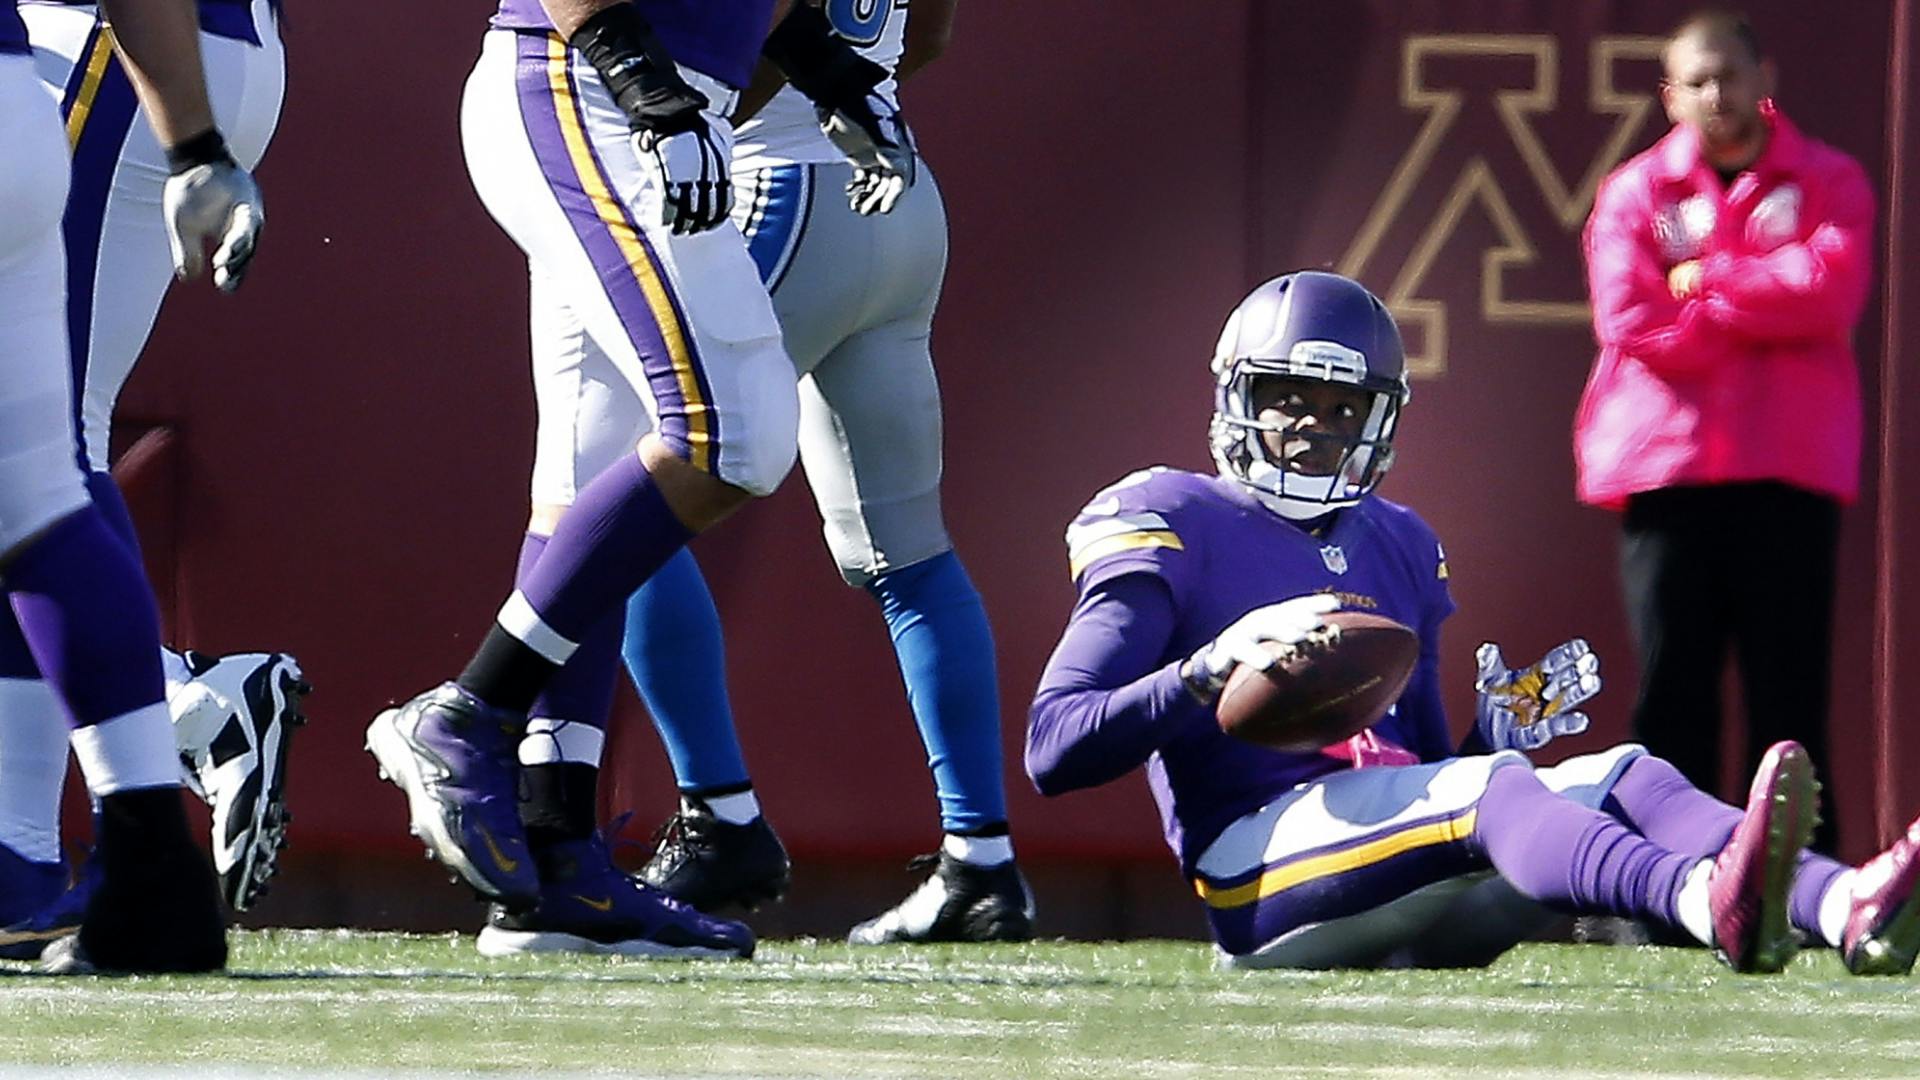 Vikings head coach Mike Zimmer expressed frustration with the team's performance and accountability.